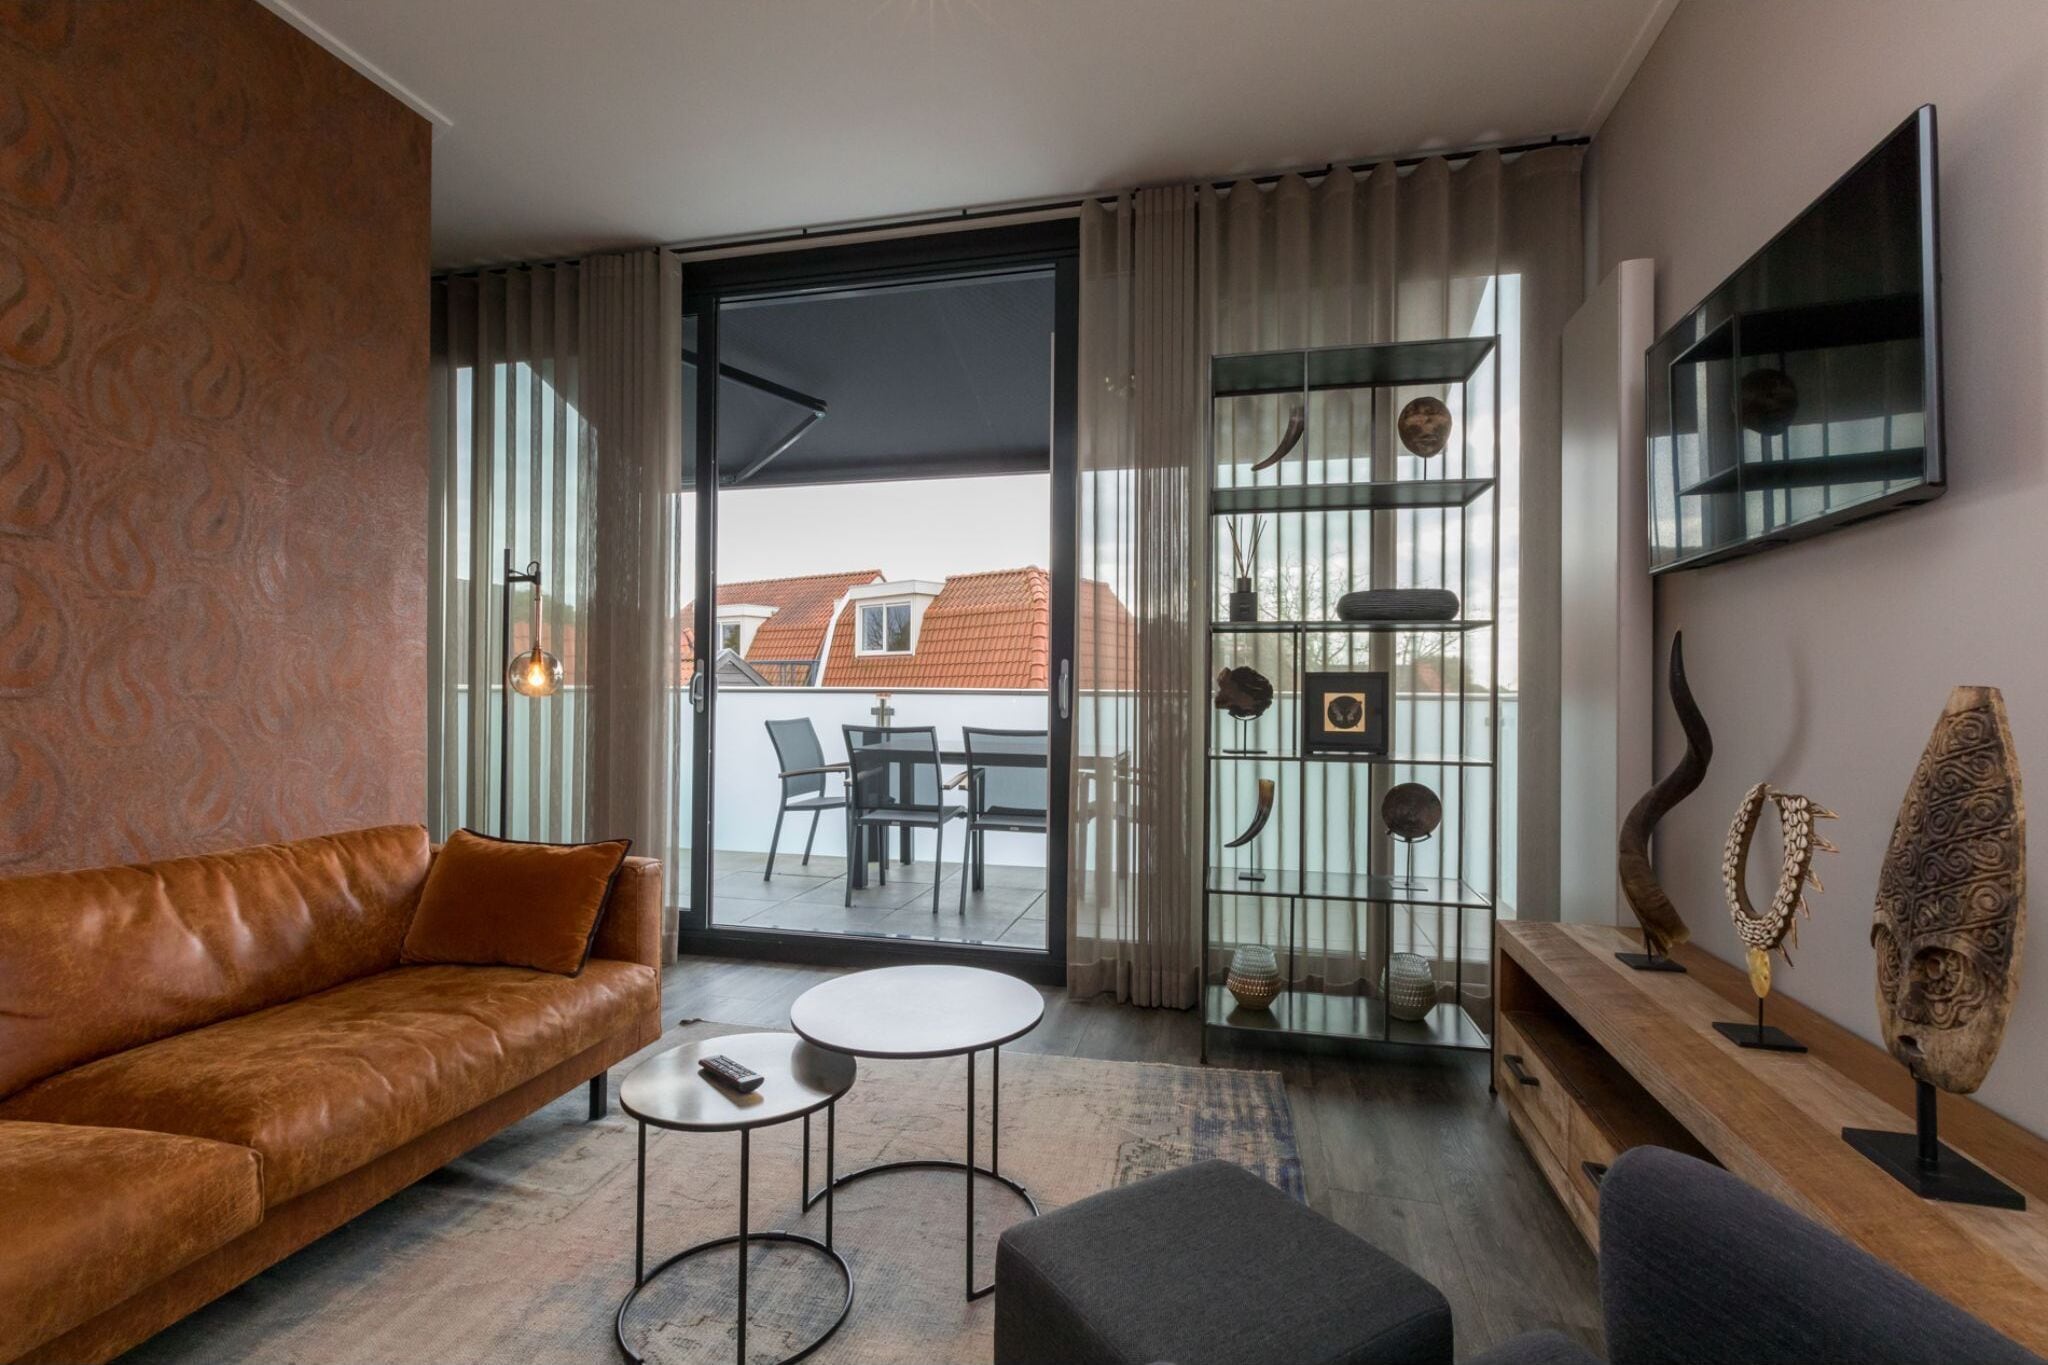 high-quality holiday apartment right in the center of Domburg